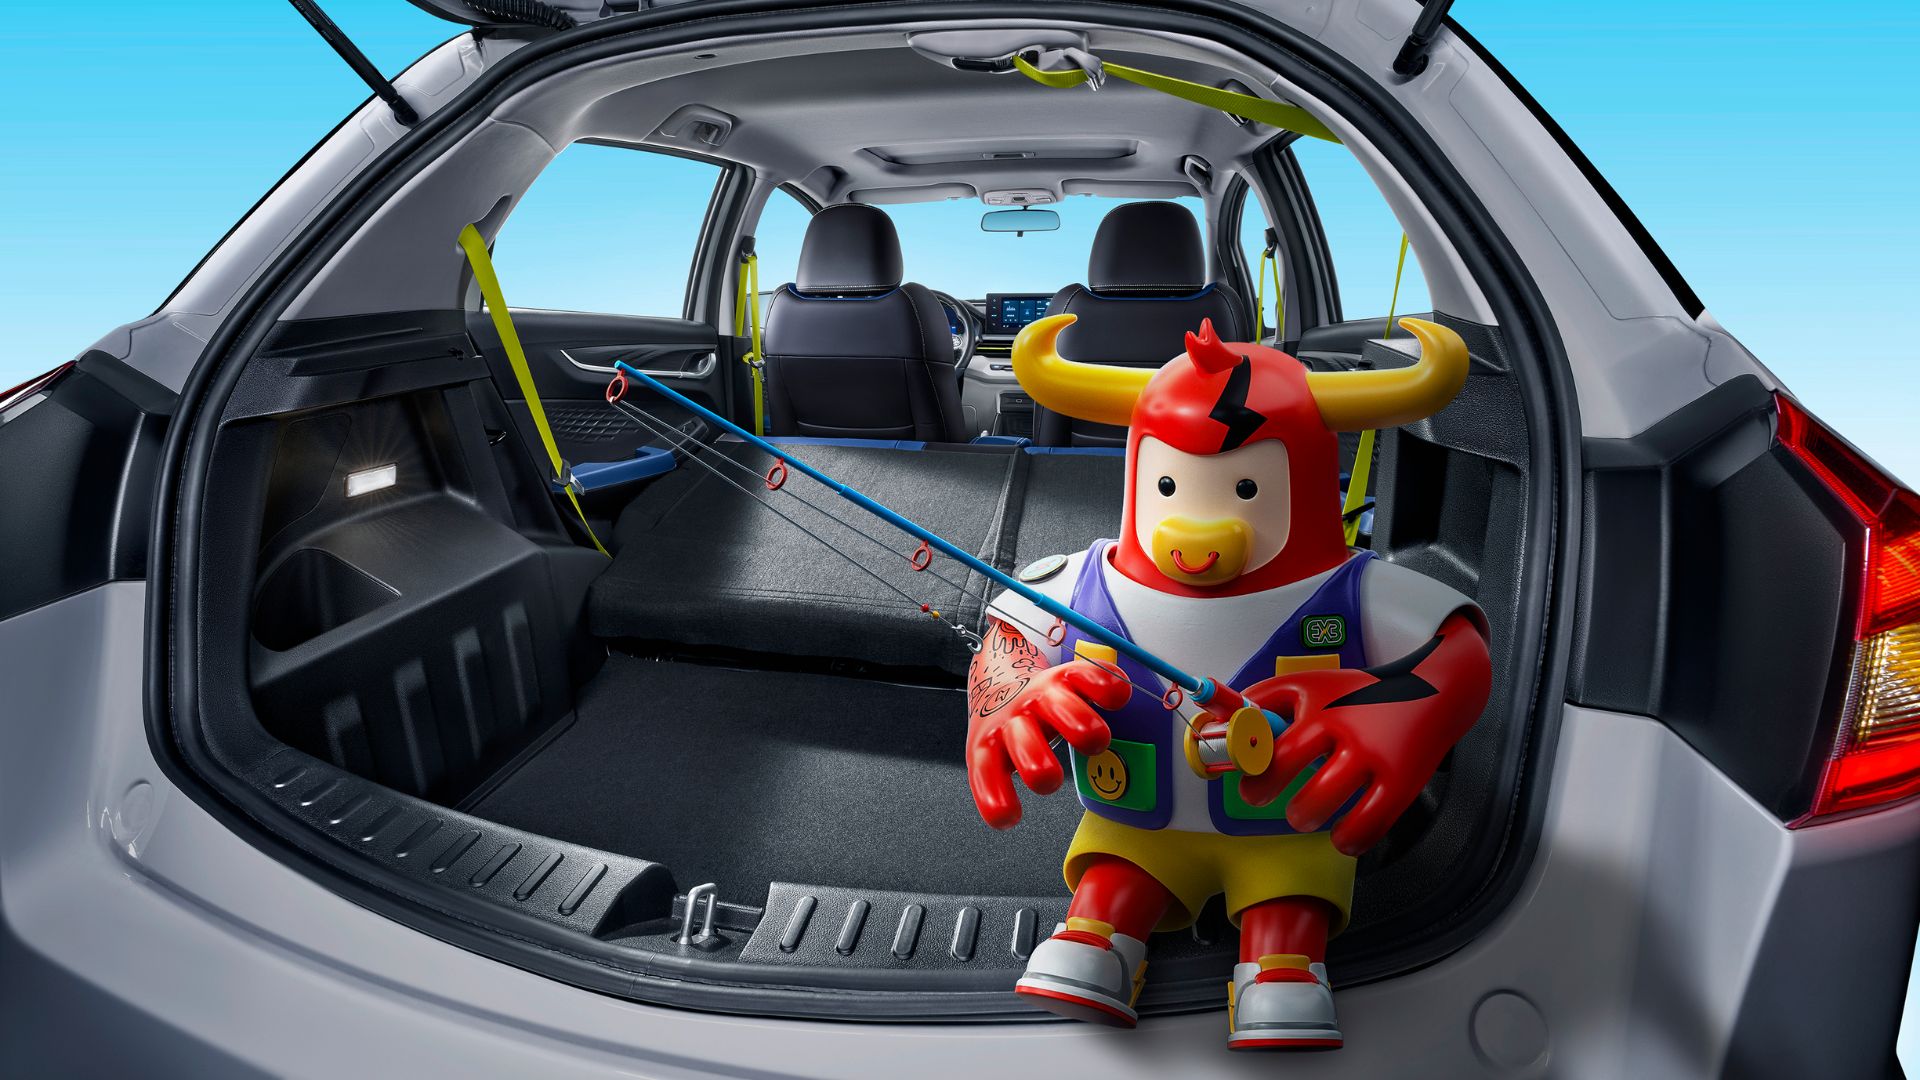 Geely Kungfu Cow mascot